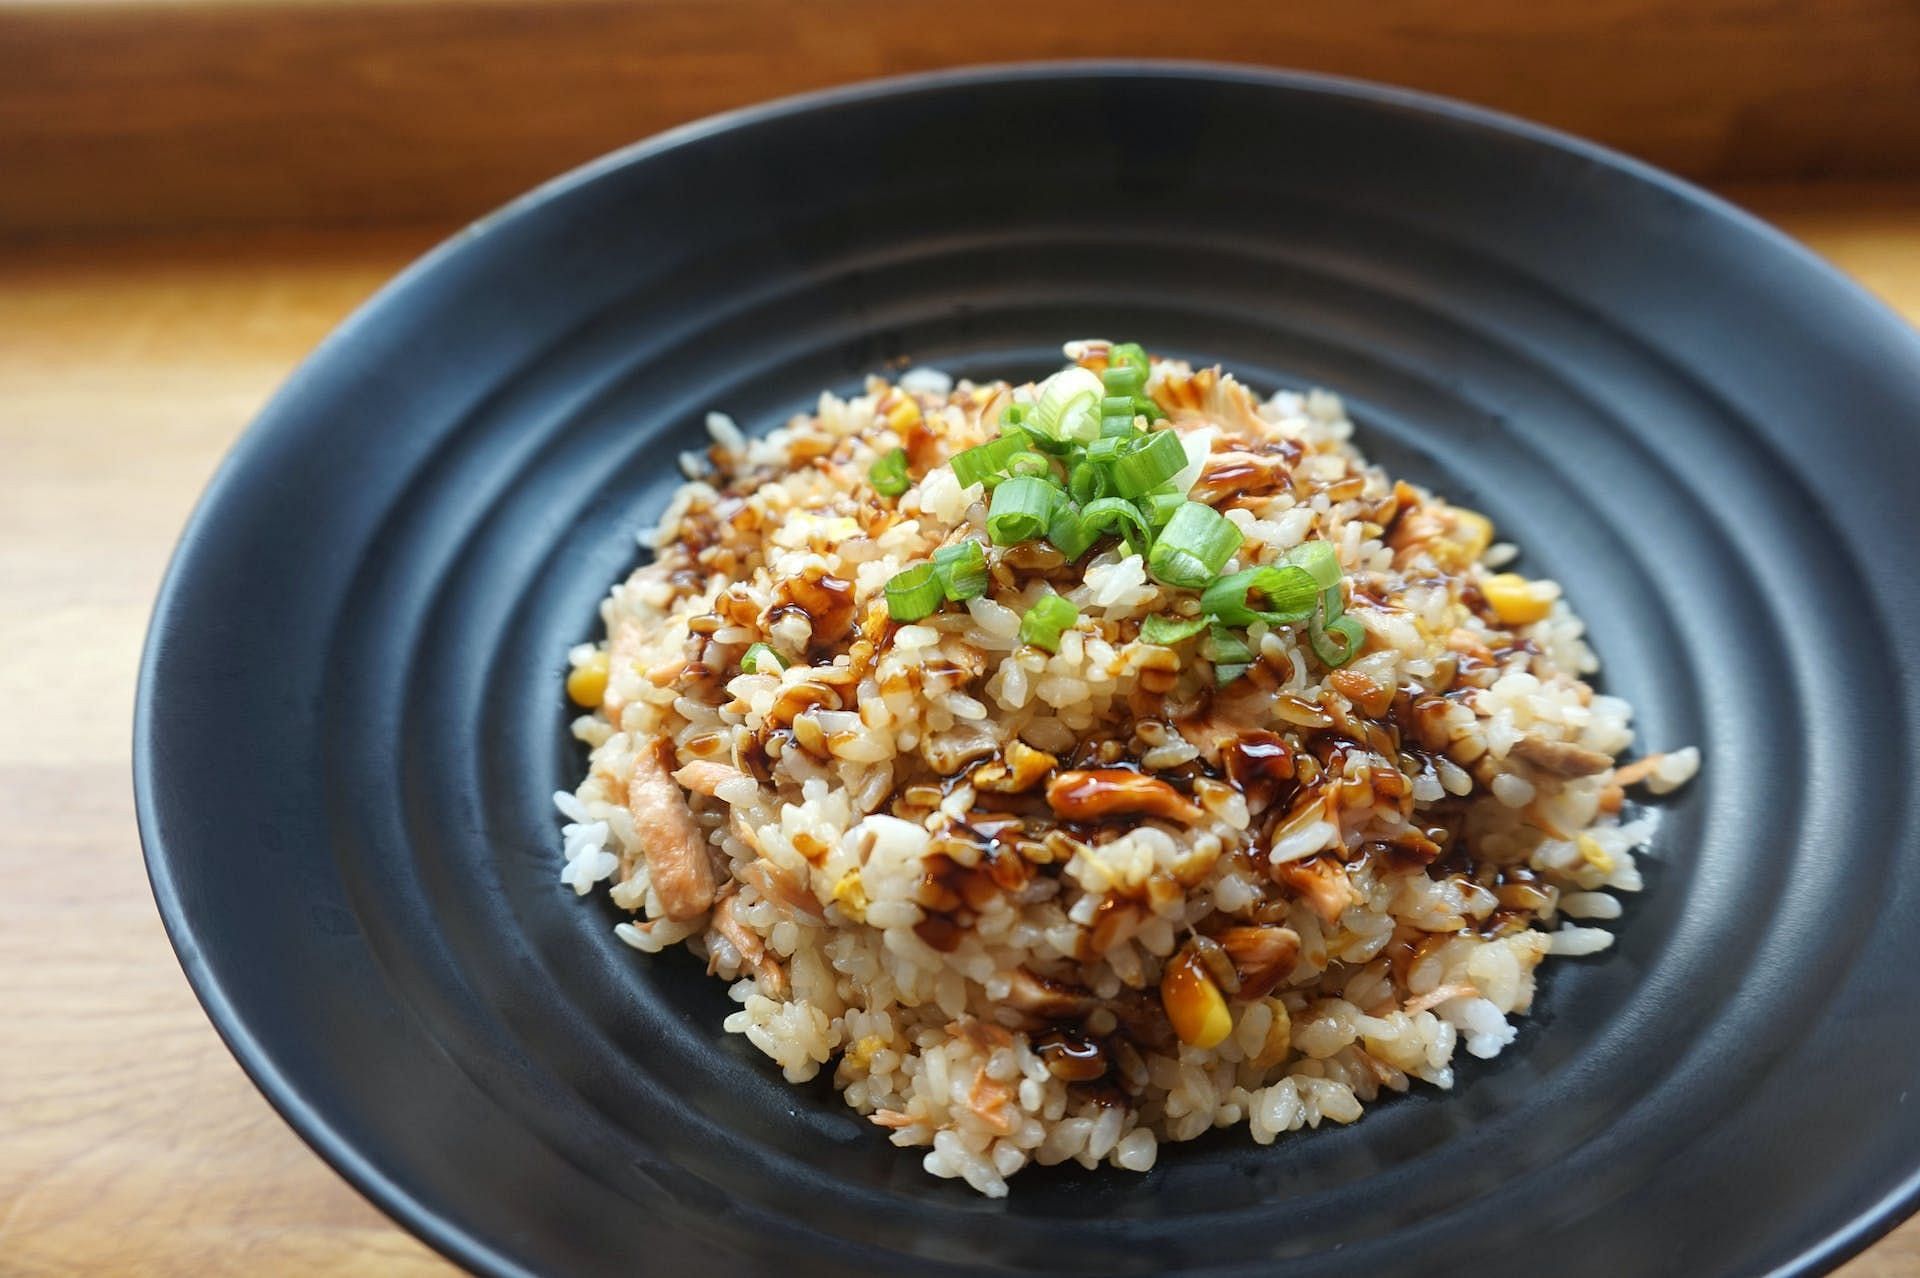 Rice on 3500 calories bulking diet. (Image credits: Pexels/ Trista Chen)